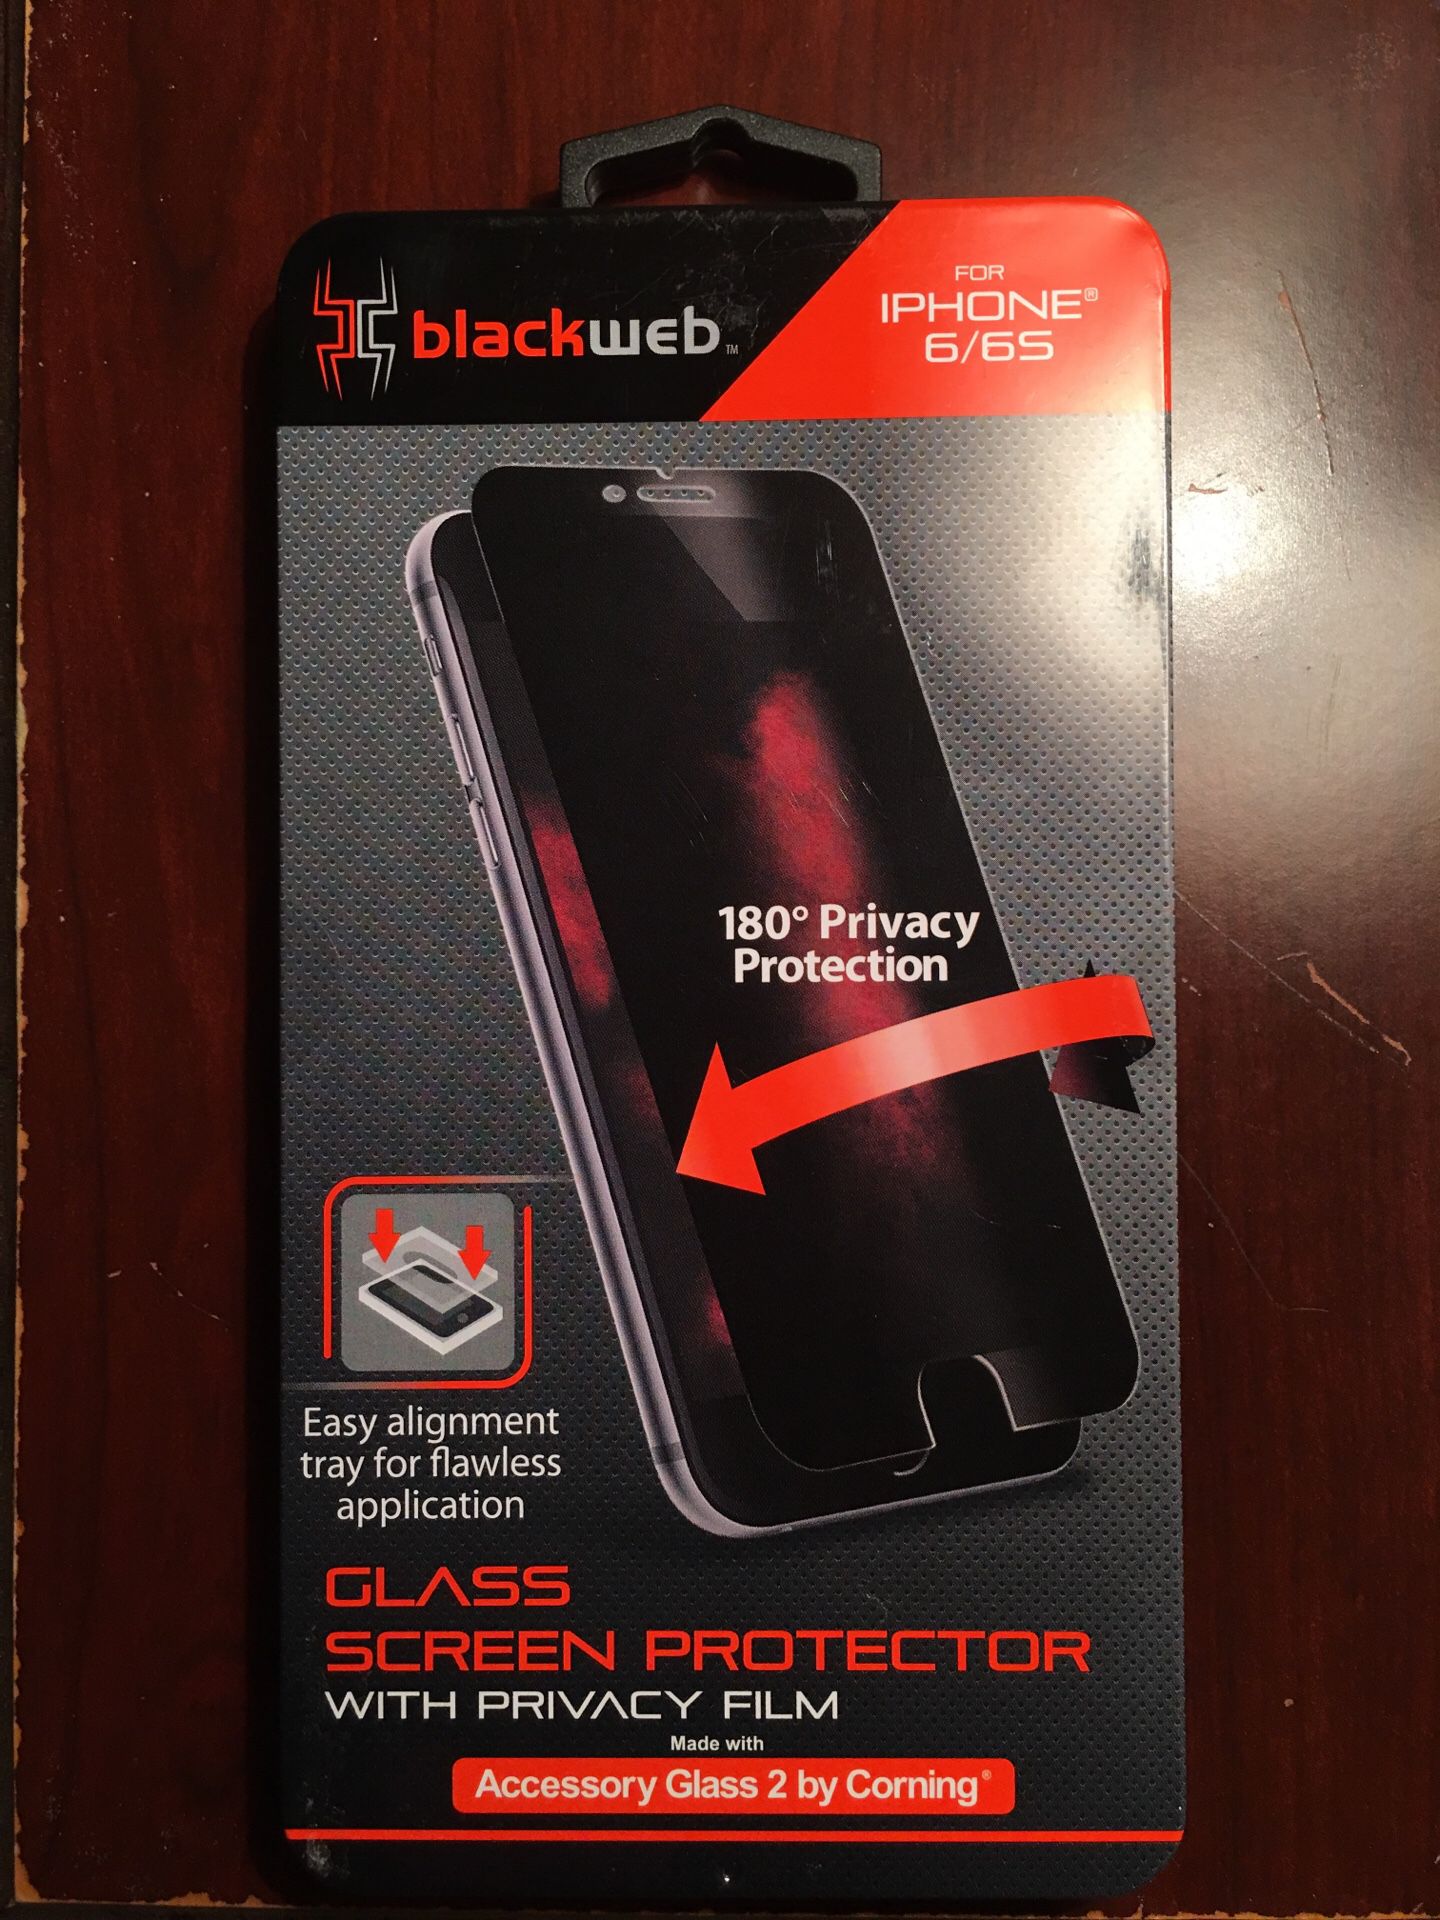 Blackweb for iPhone 6/6s Glass Screen Protector with Privacy Film